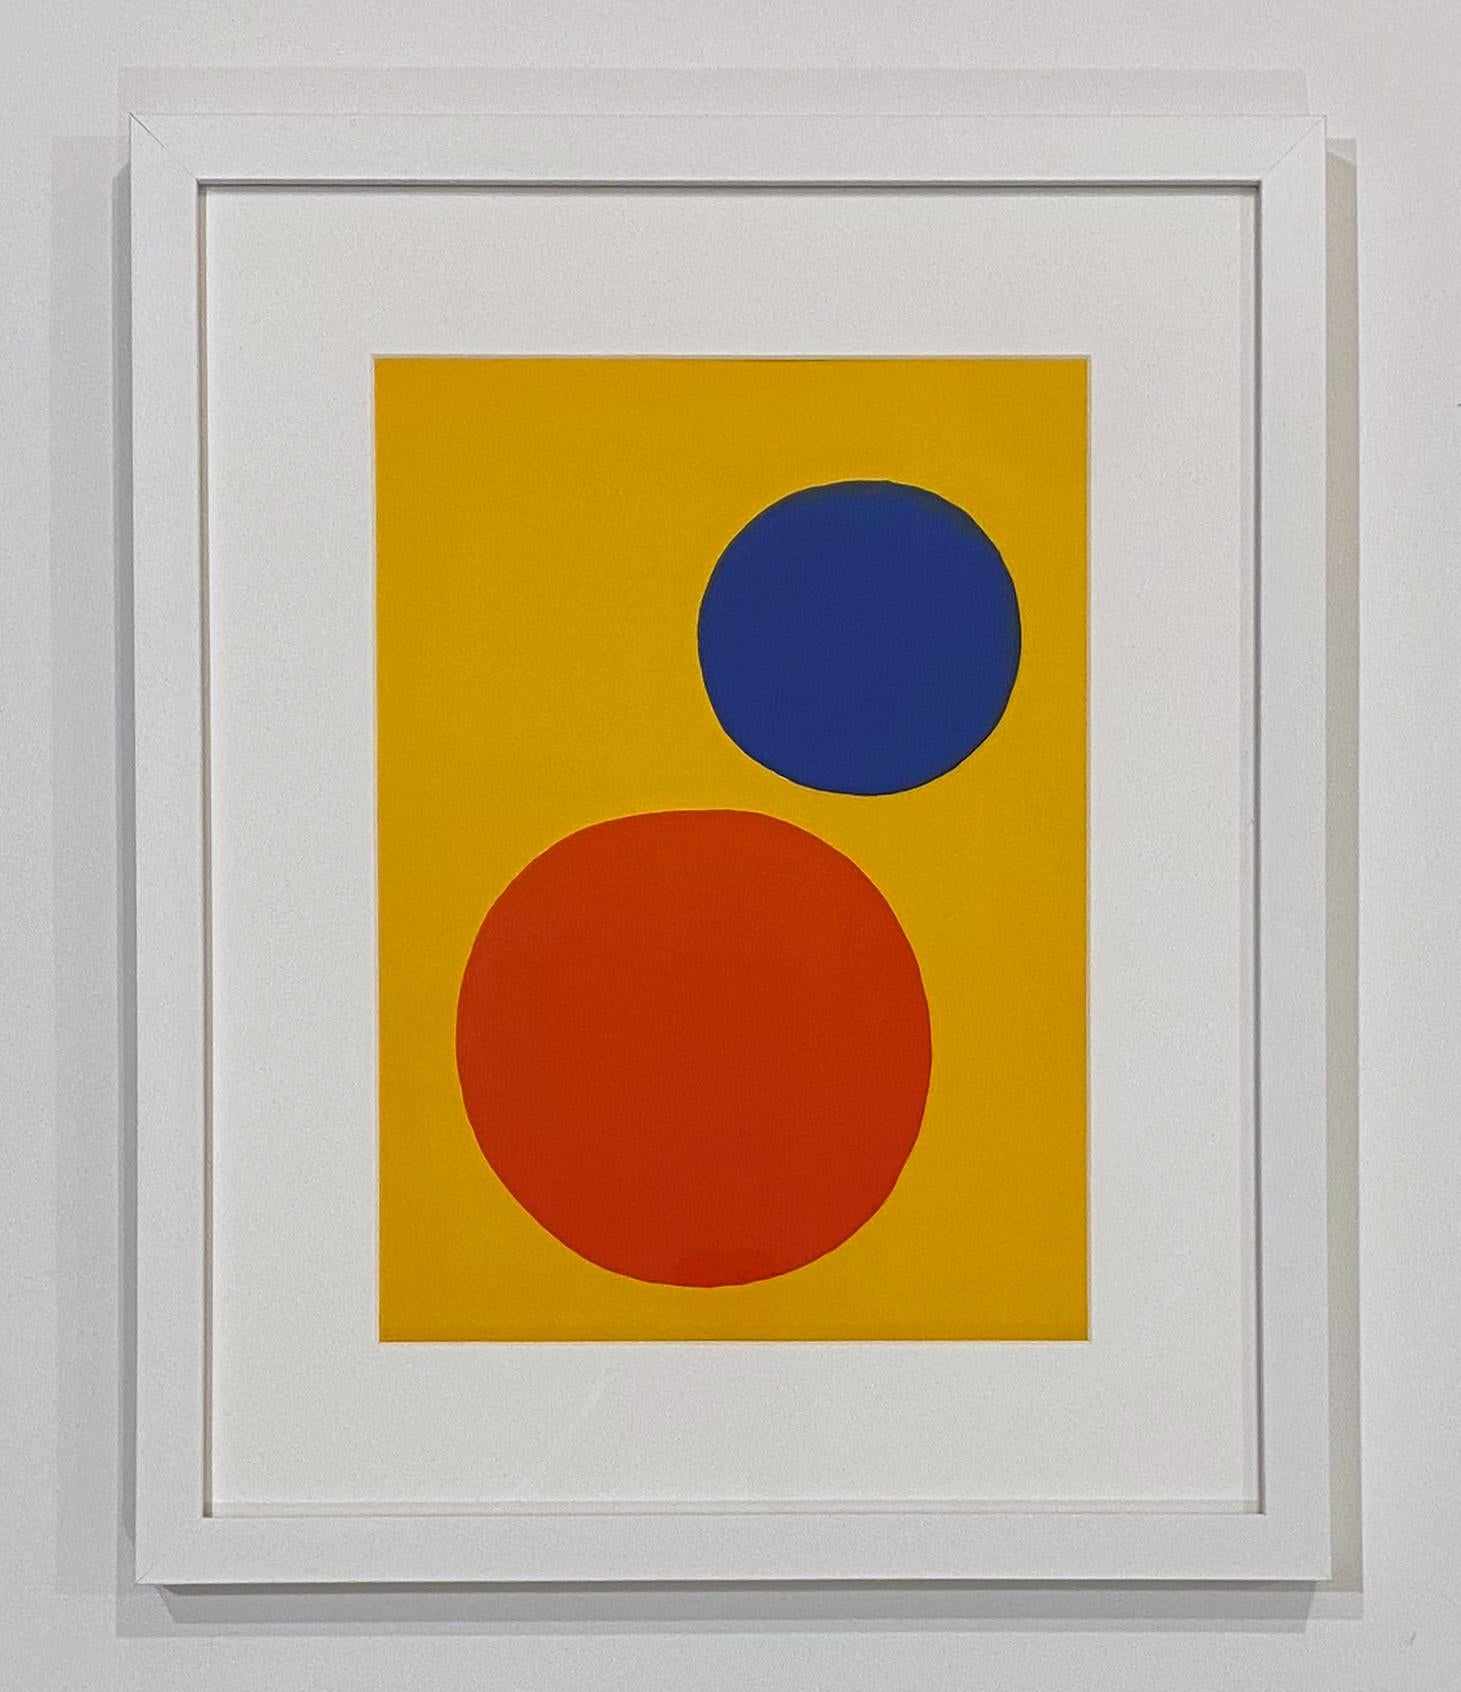 Red and Blue Spheres, from Derriere le Miroir #201 - Print by Alexander Calder